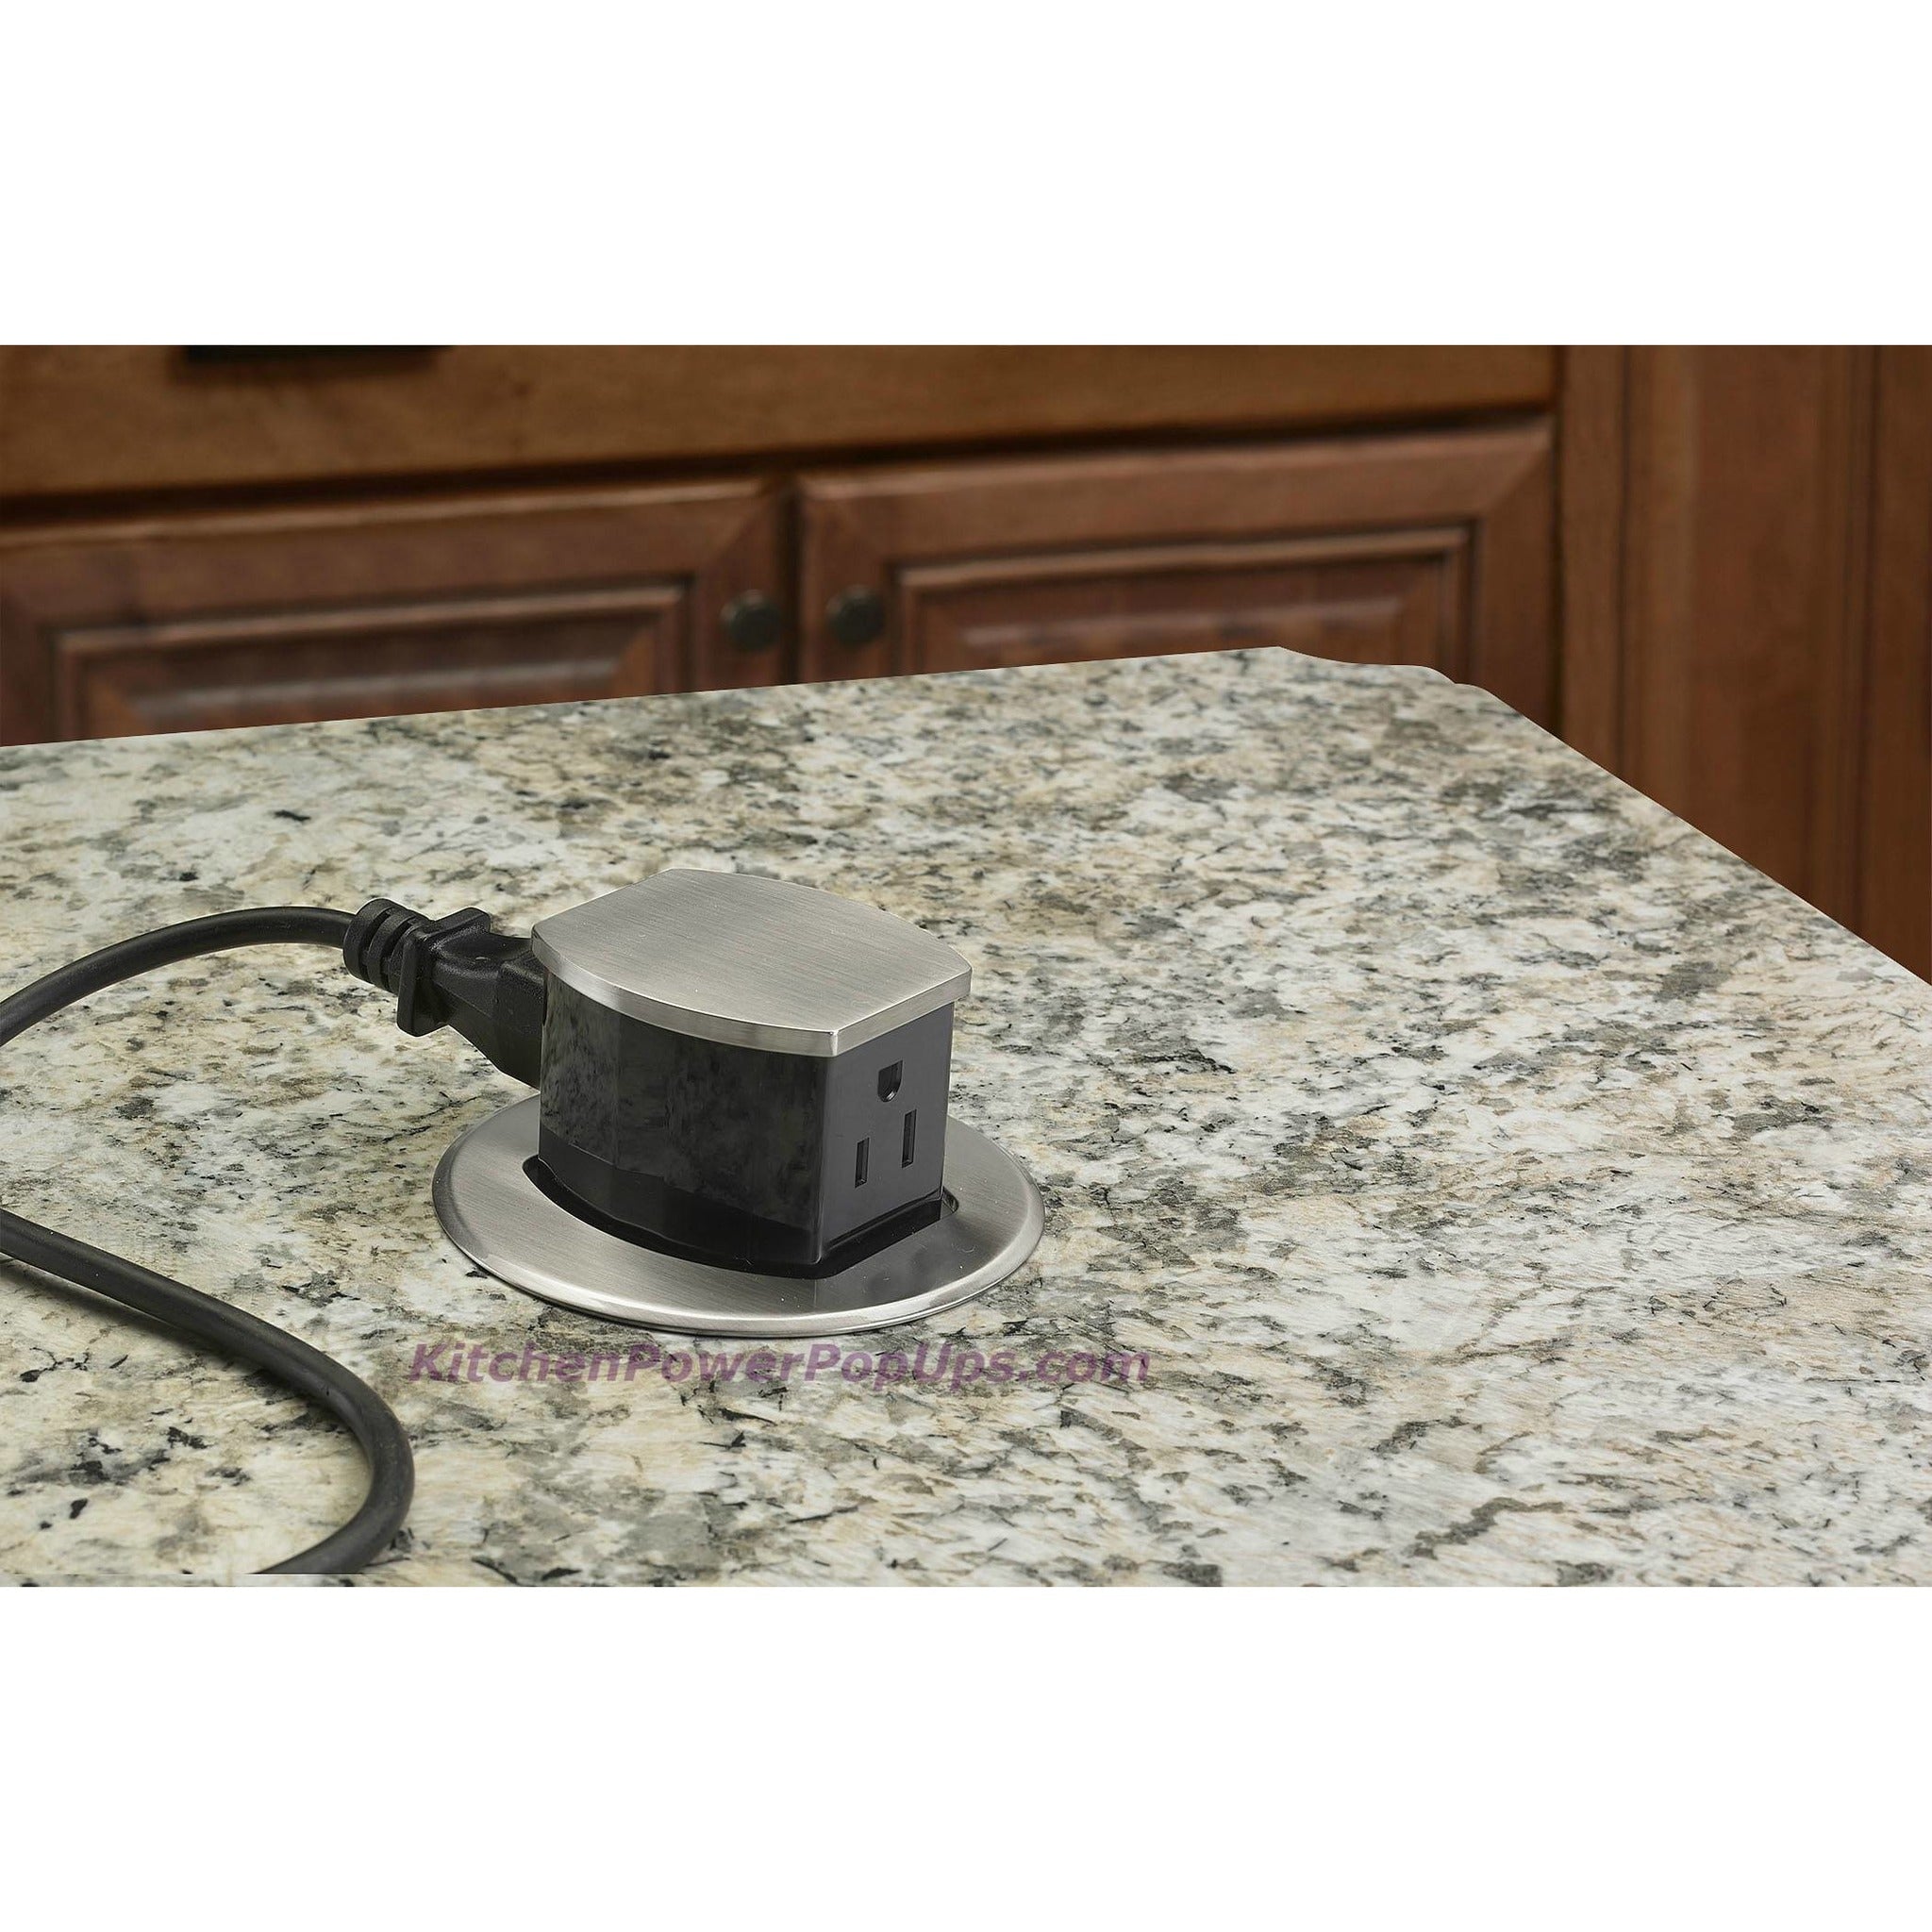 Hubbell Countertop Receptacles, Surface or Flush Mount Decision Guide –  Kitchen Power Pop Ups